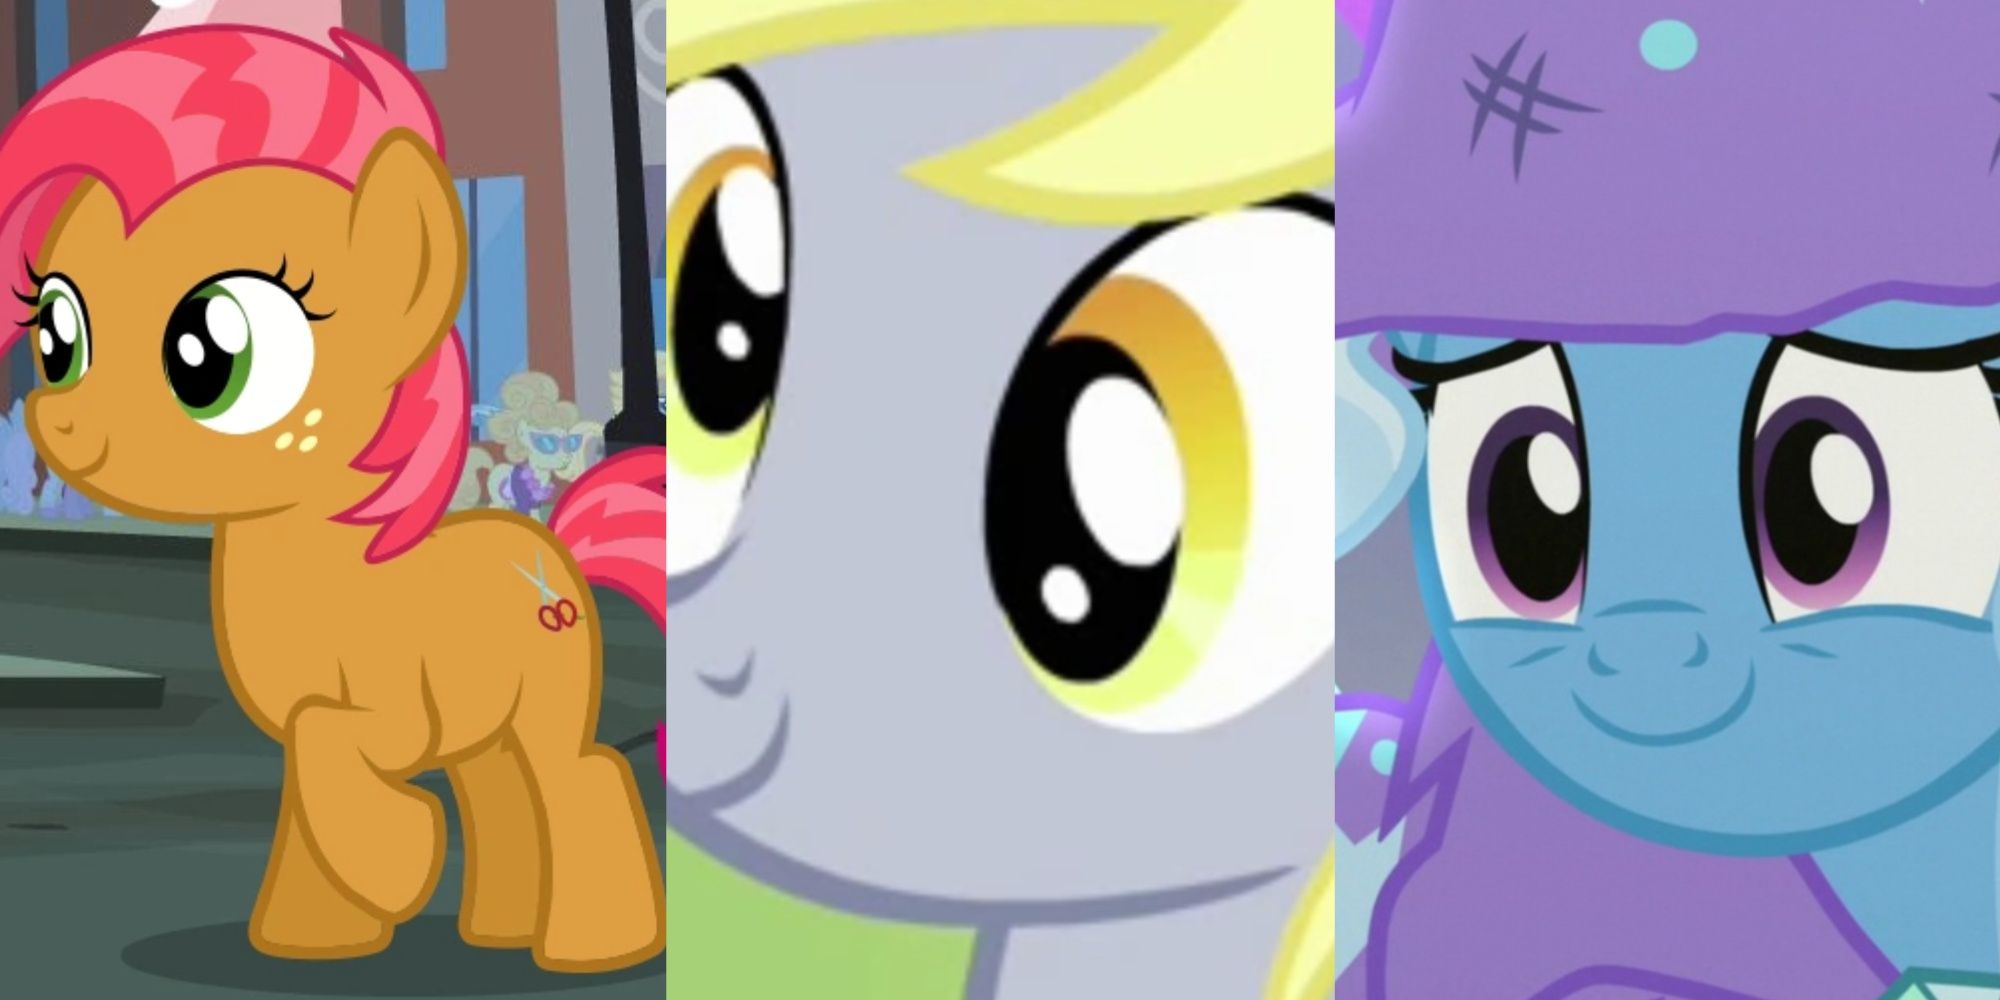 Split Image Babs Seed, Derpy Hooves, Trixie Lulamoon